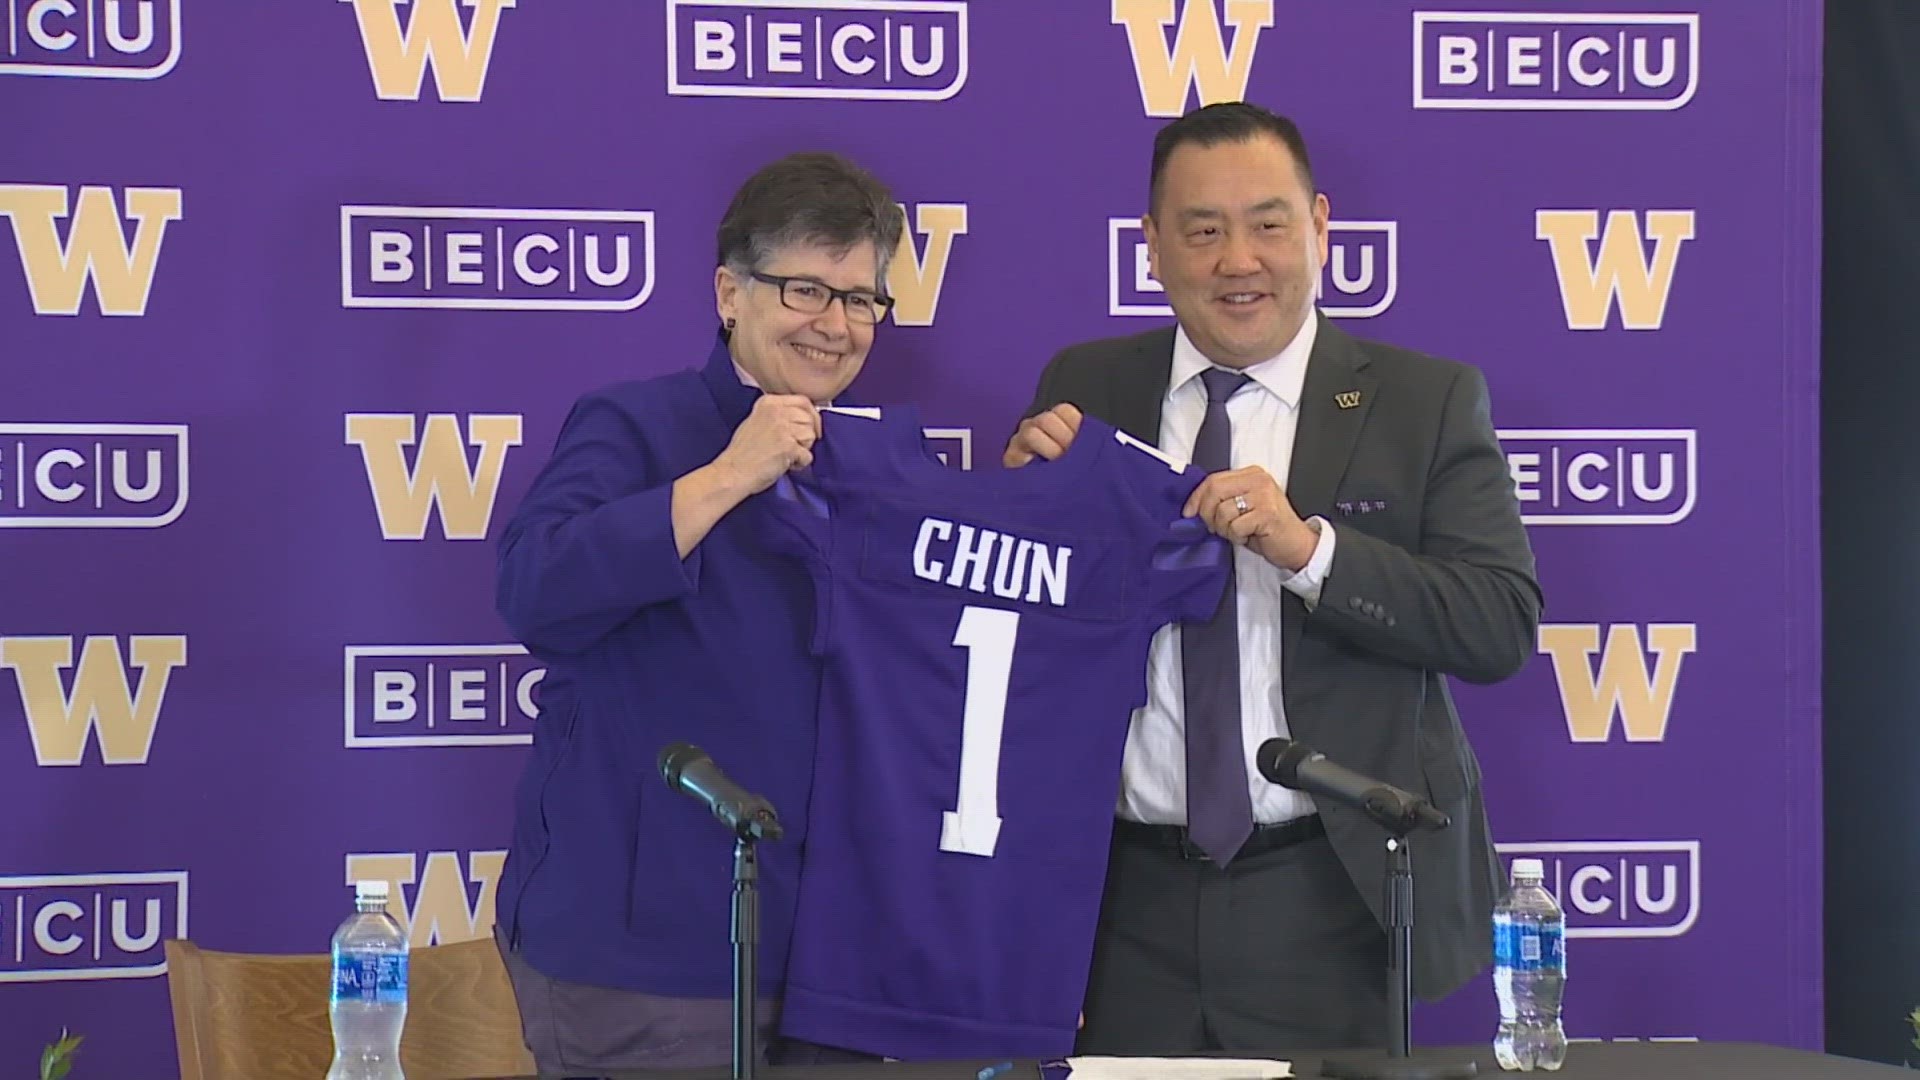 Pat Chun becomes the latest leader of a UW athletic department that has seen a lot of change in the past year.